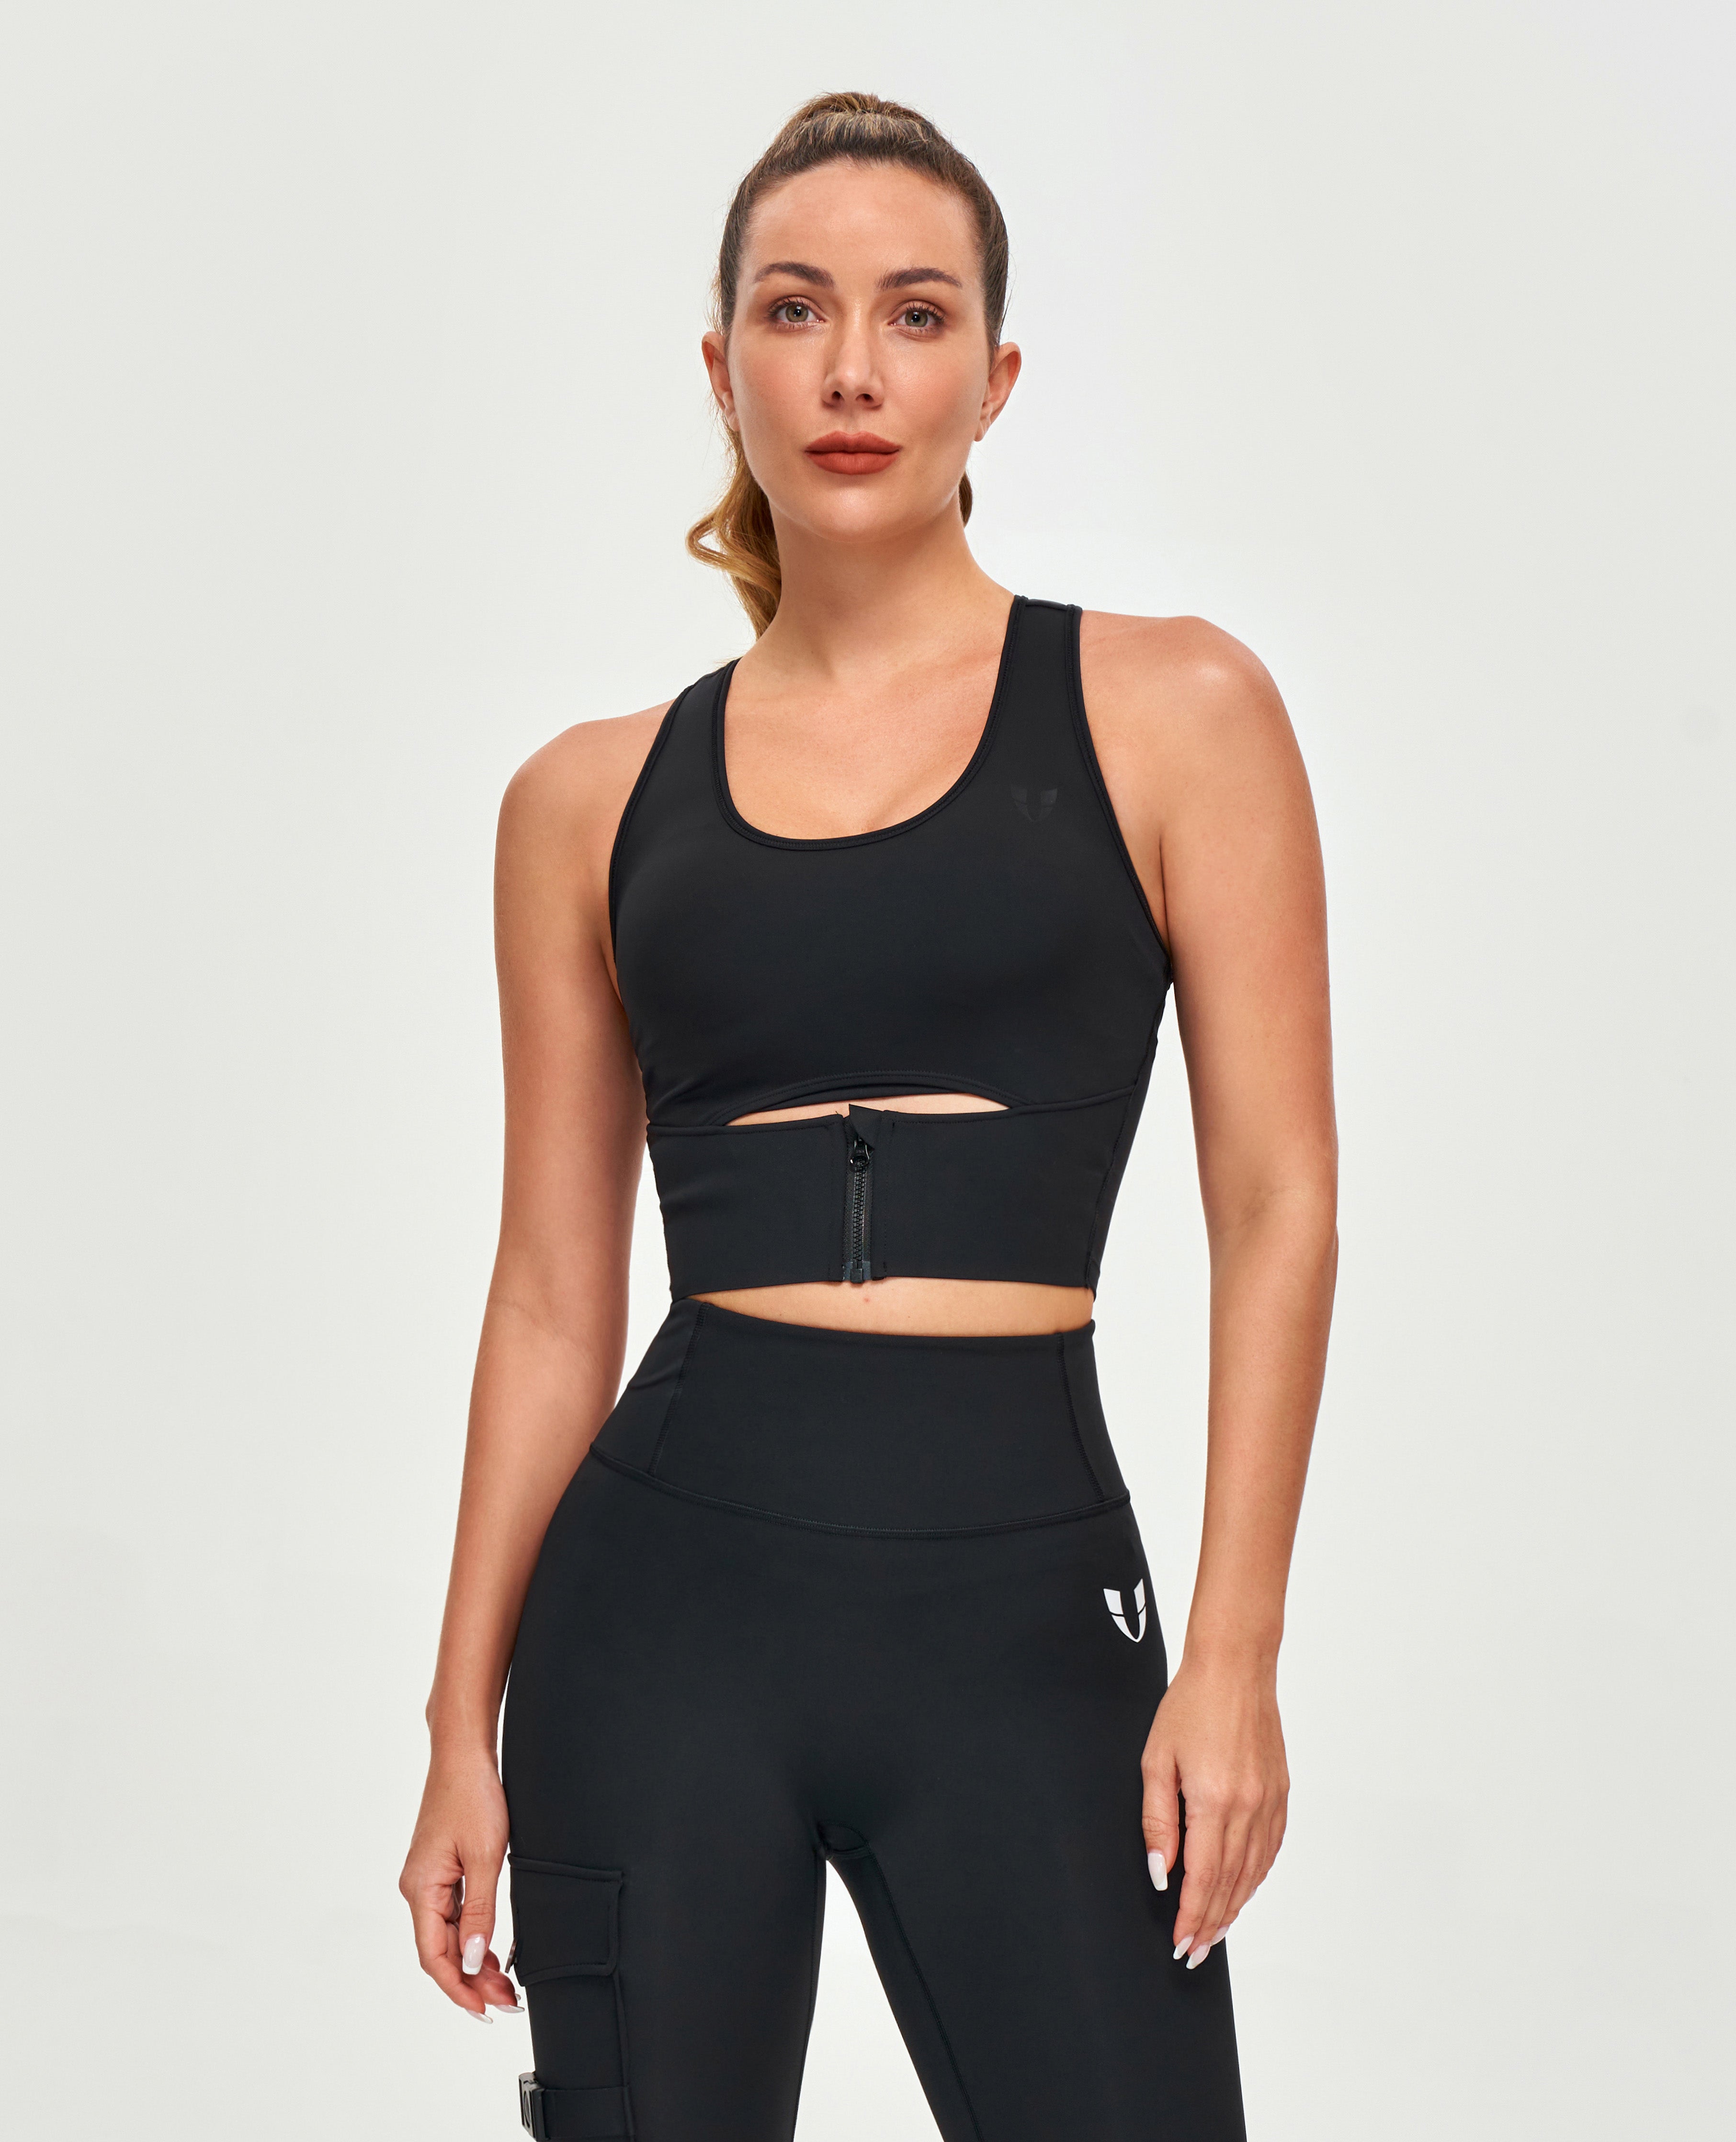 NEW NIKE SPORTS BRA LIGHT SUPPORT NON PADDED CUT OUT HIGH NECK BLACK SIZE  XS